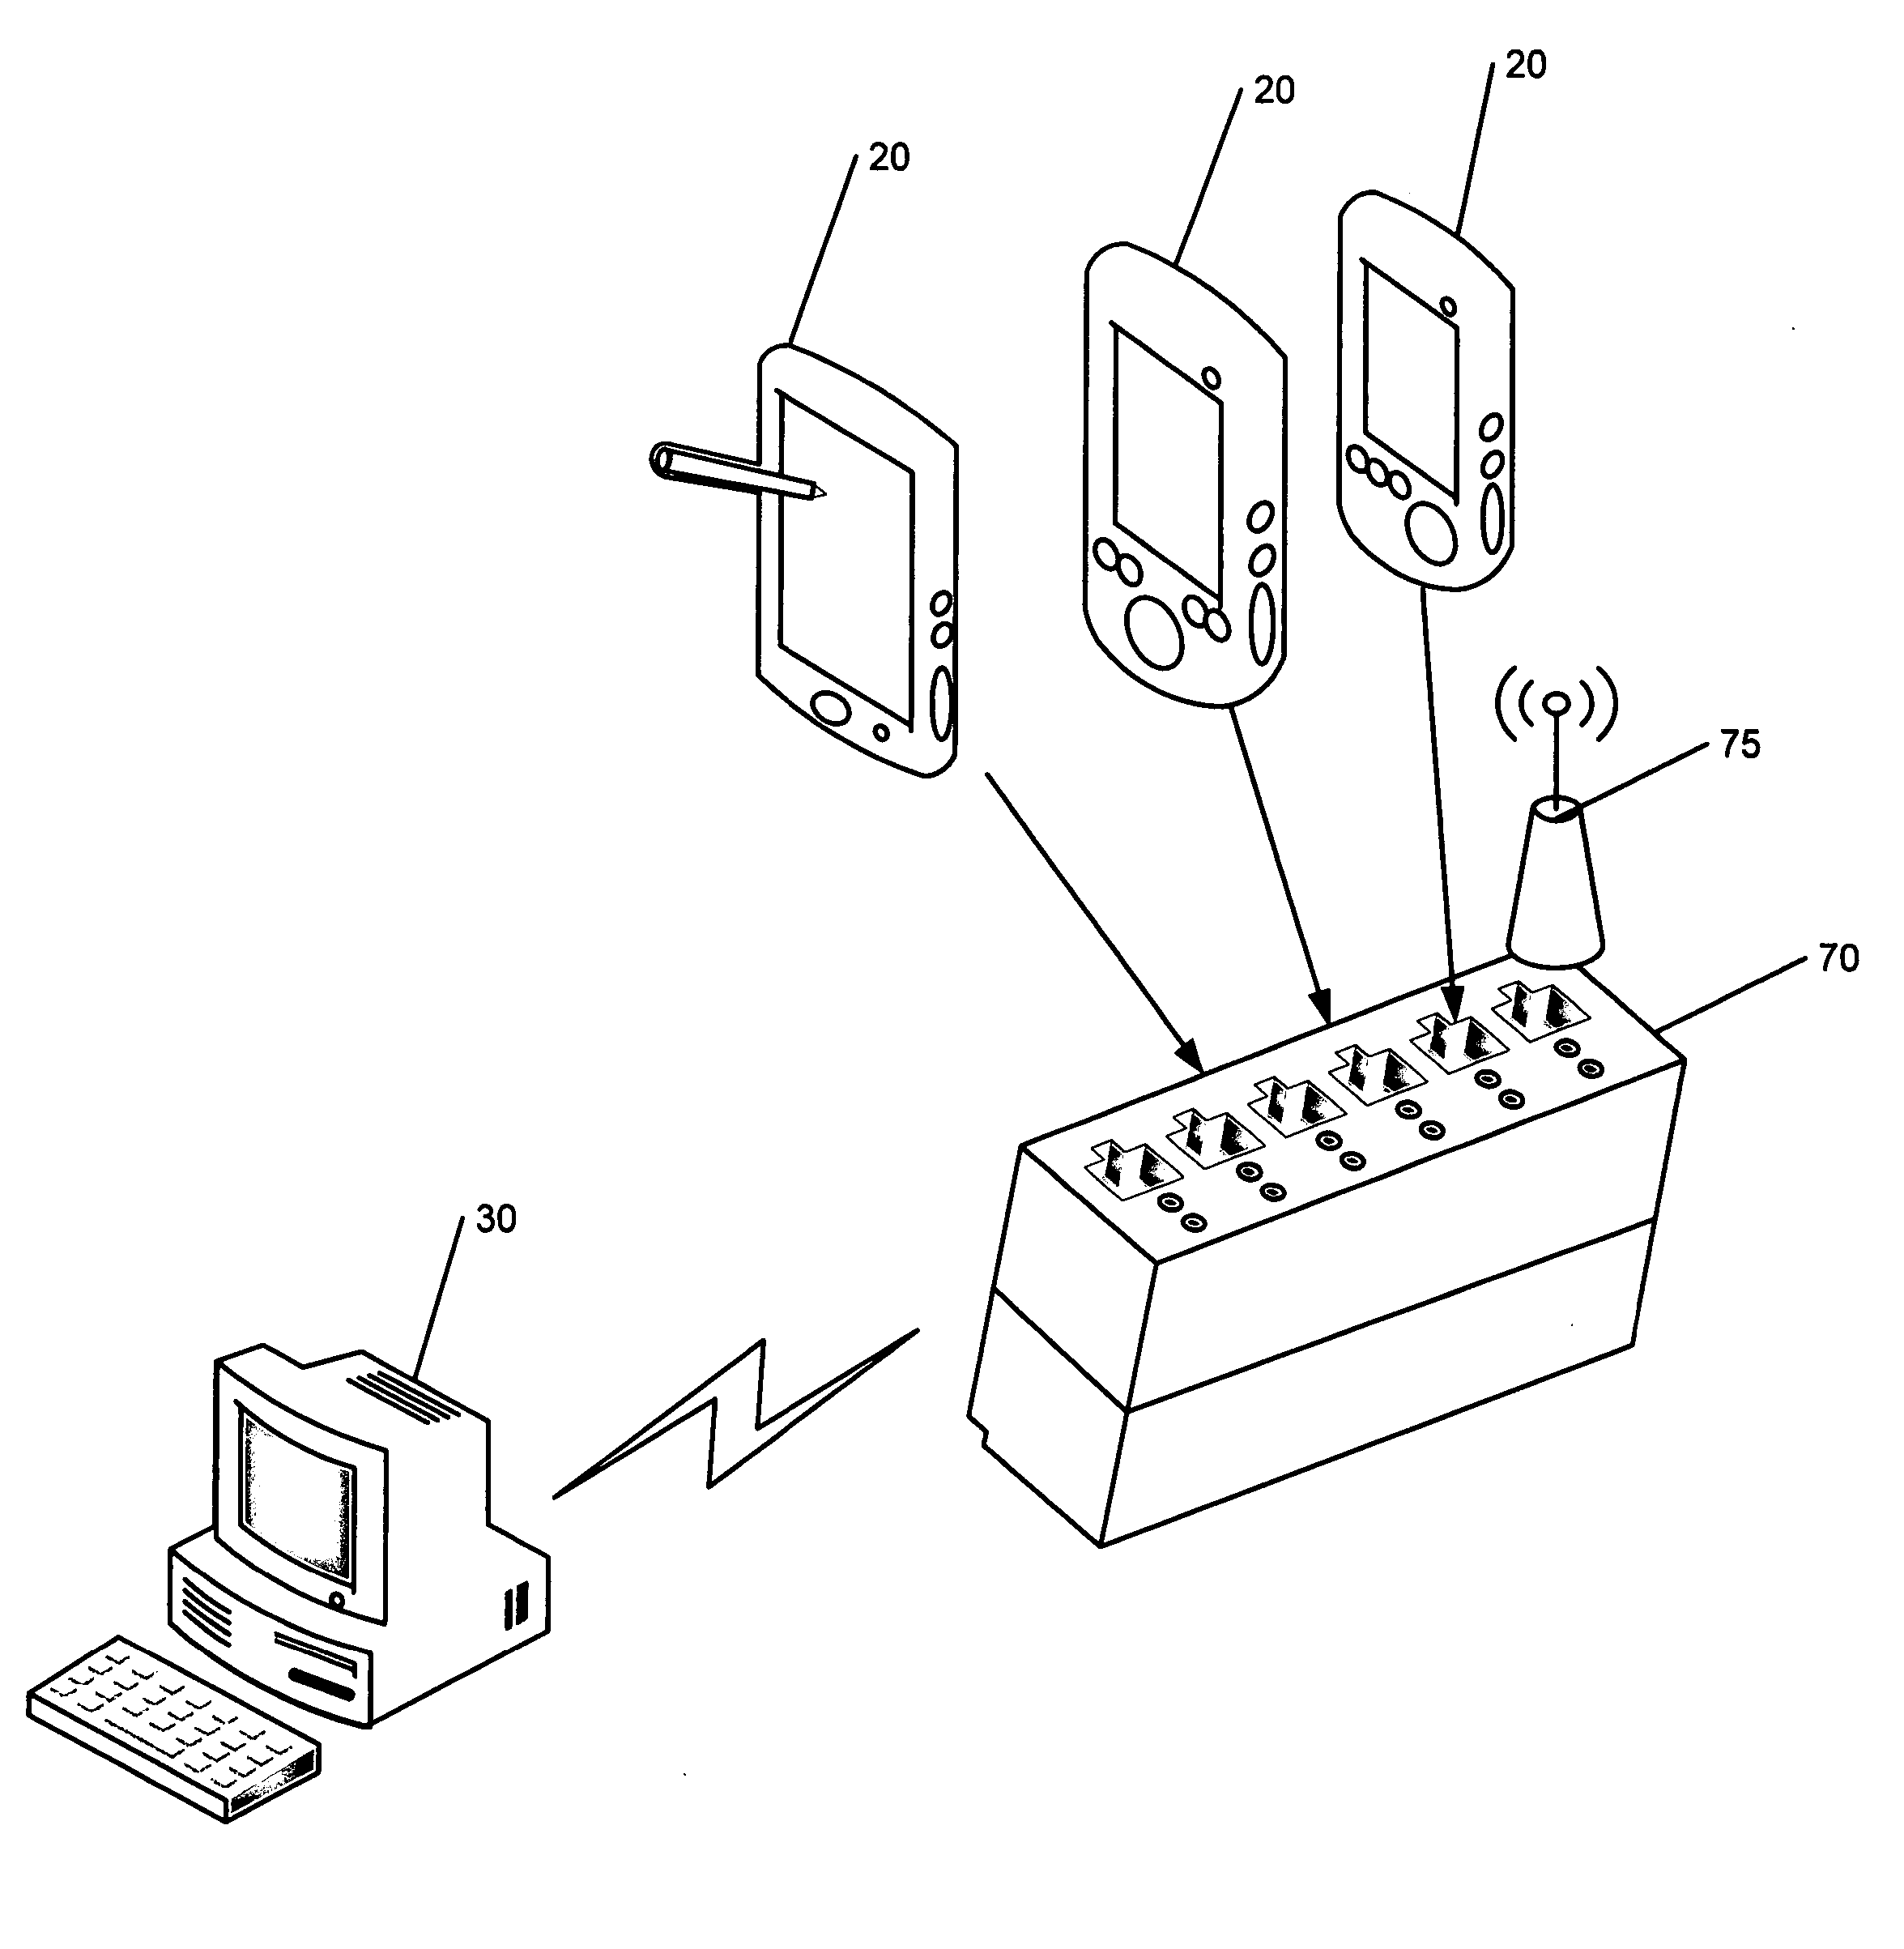 Entertainment paging system and method